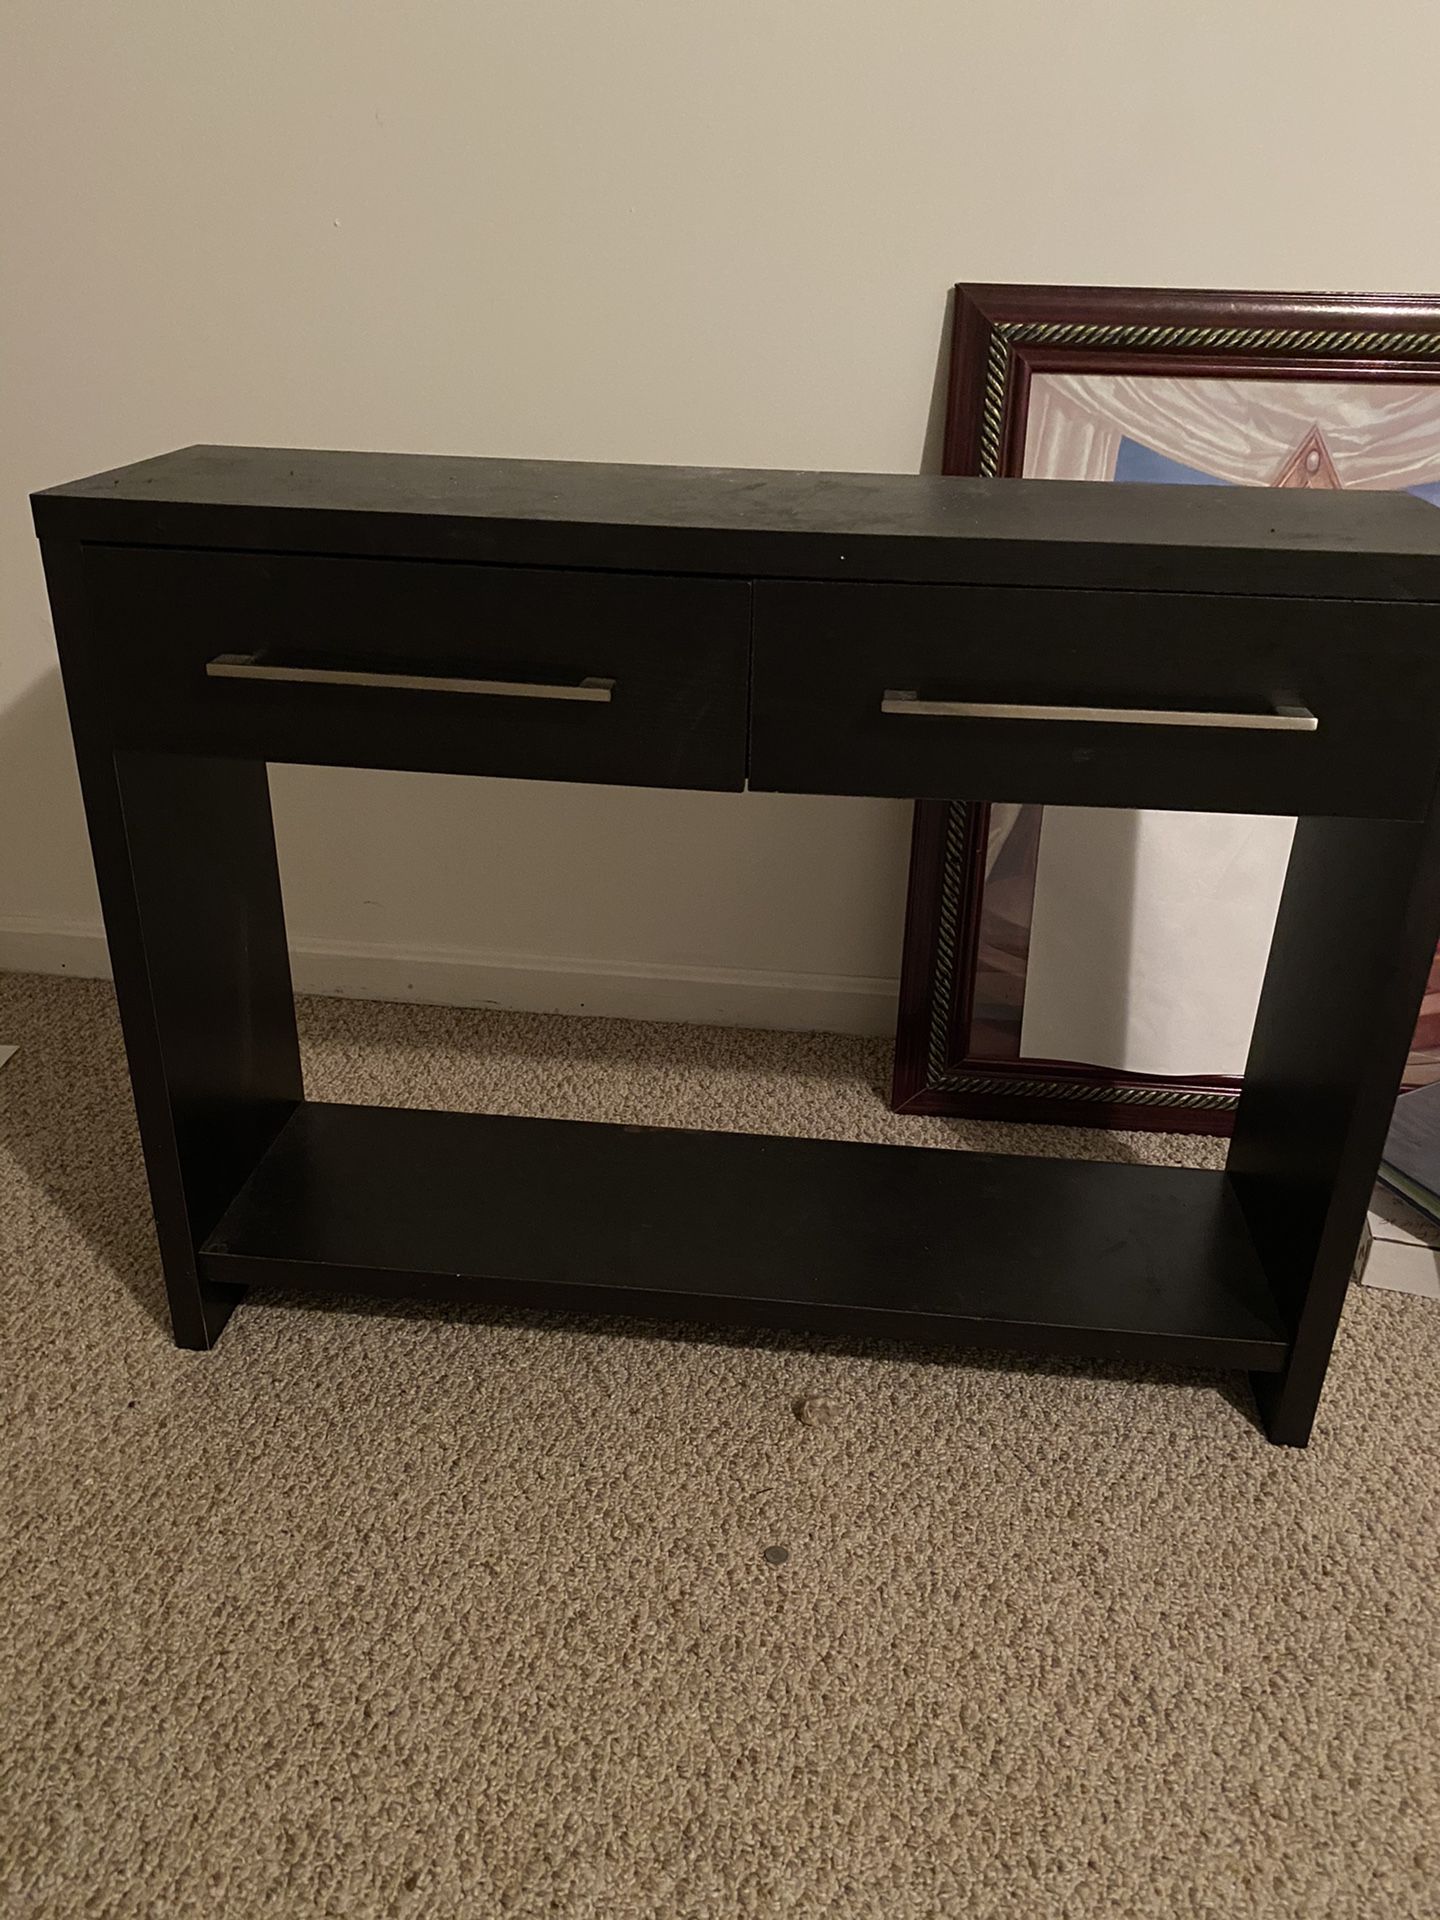 Black Stand With Drawers